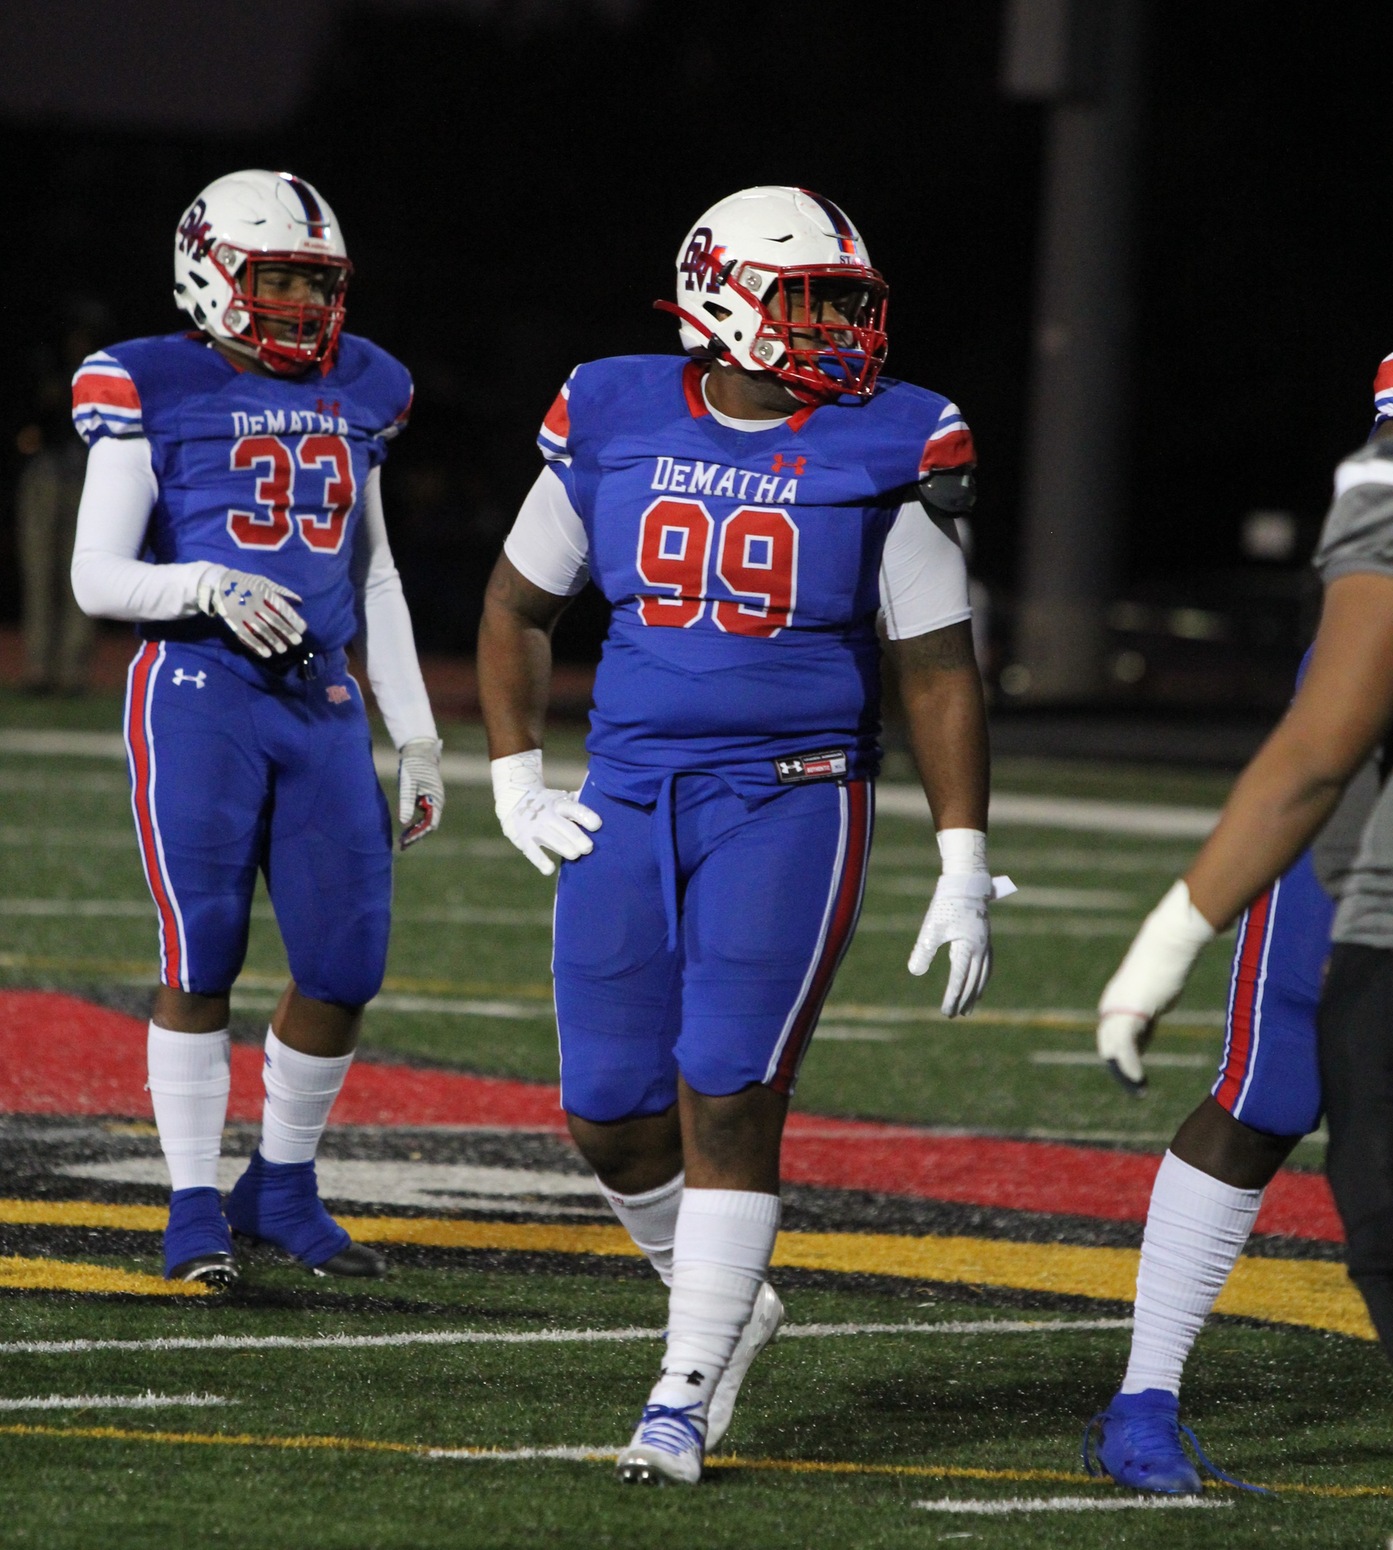 DeMatha's defense, led by Senior Melteon Davis (#99), continues to shut down their opponents.  (PHOTO BY: Ed King)